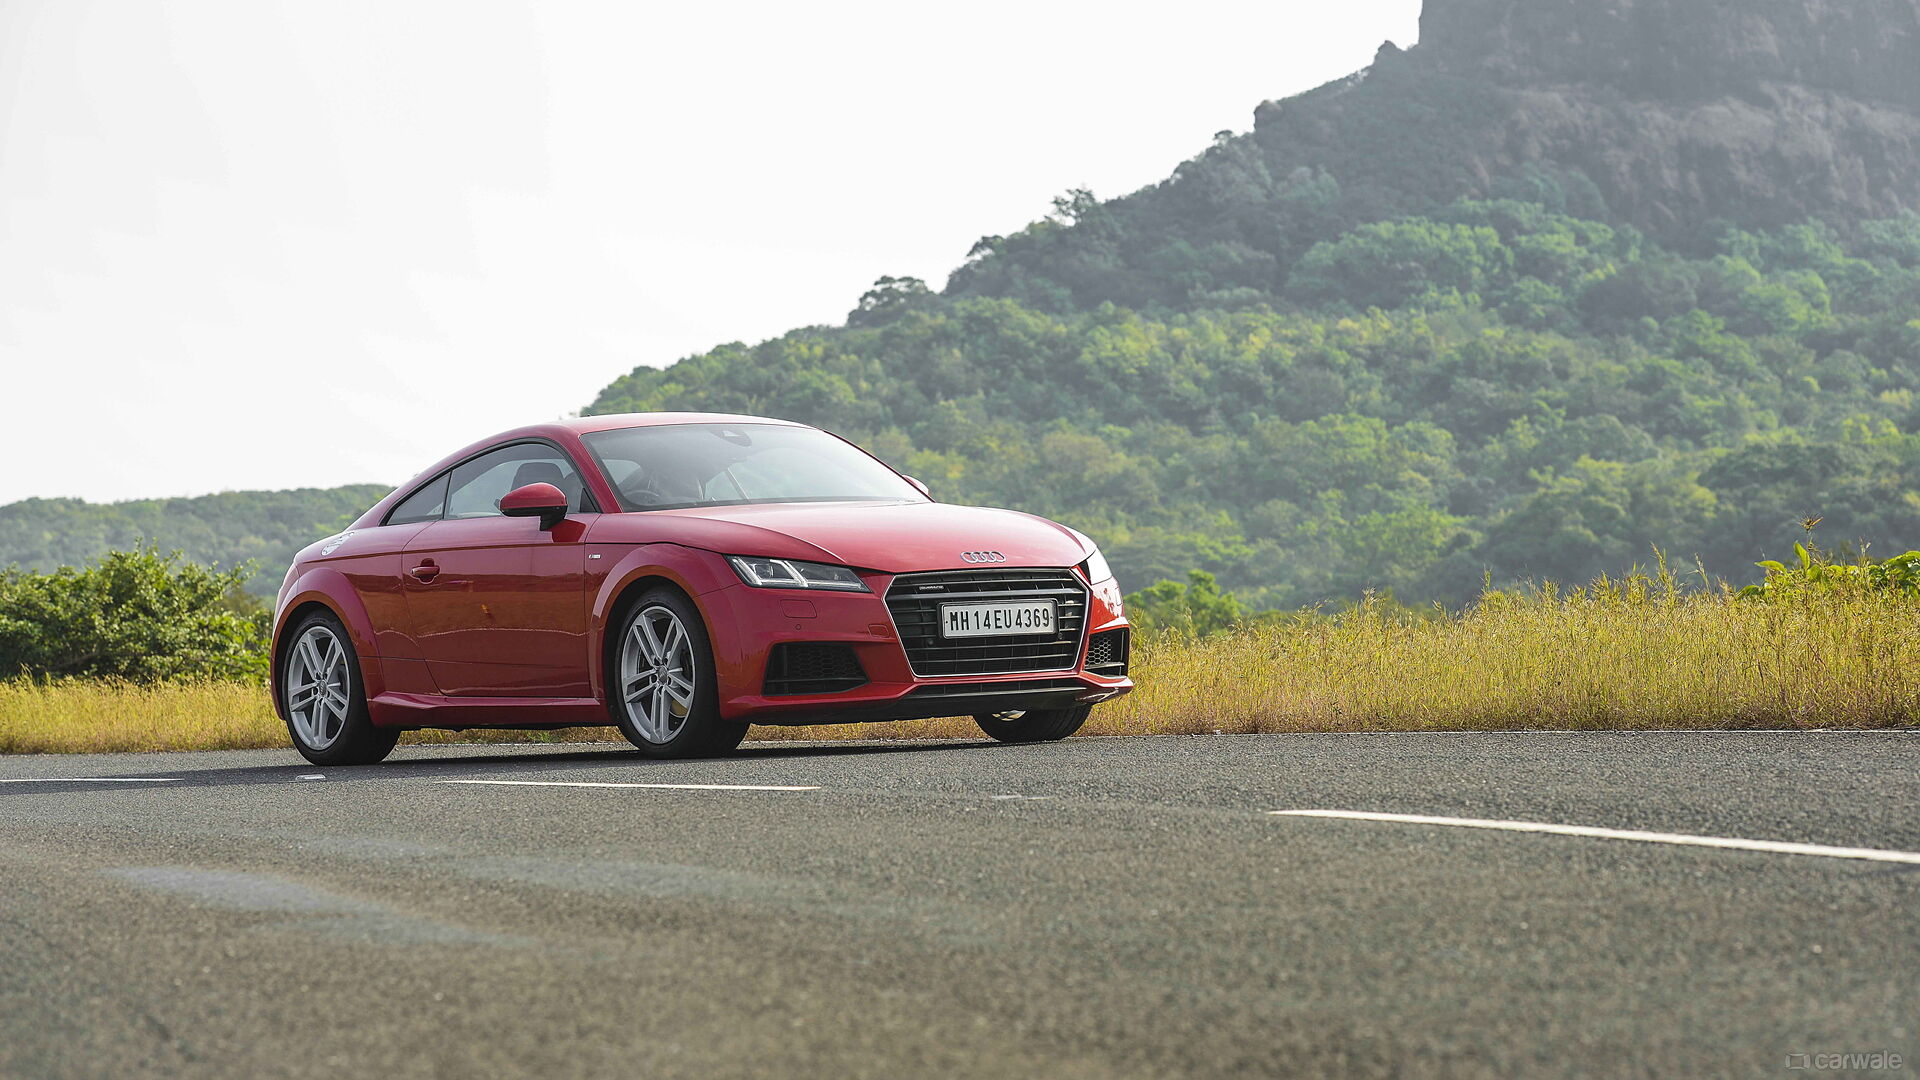 Audi TT likely to be discontinued soon - CarWale